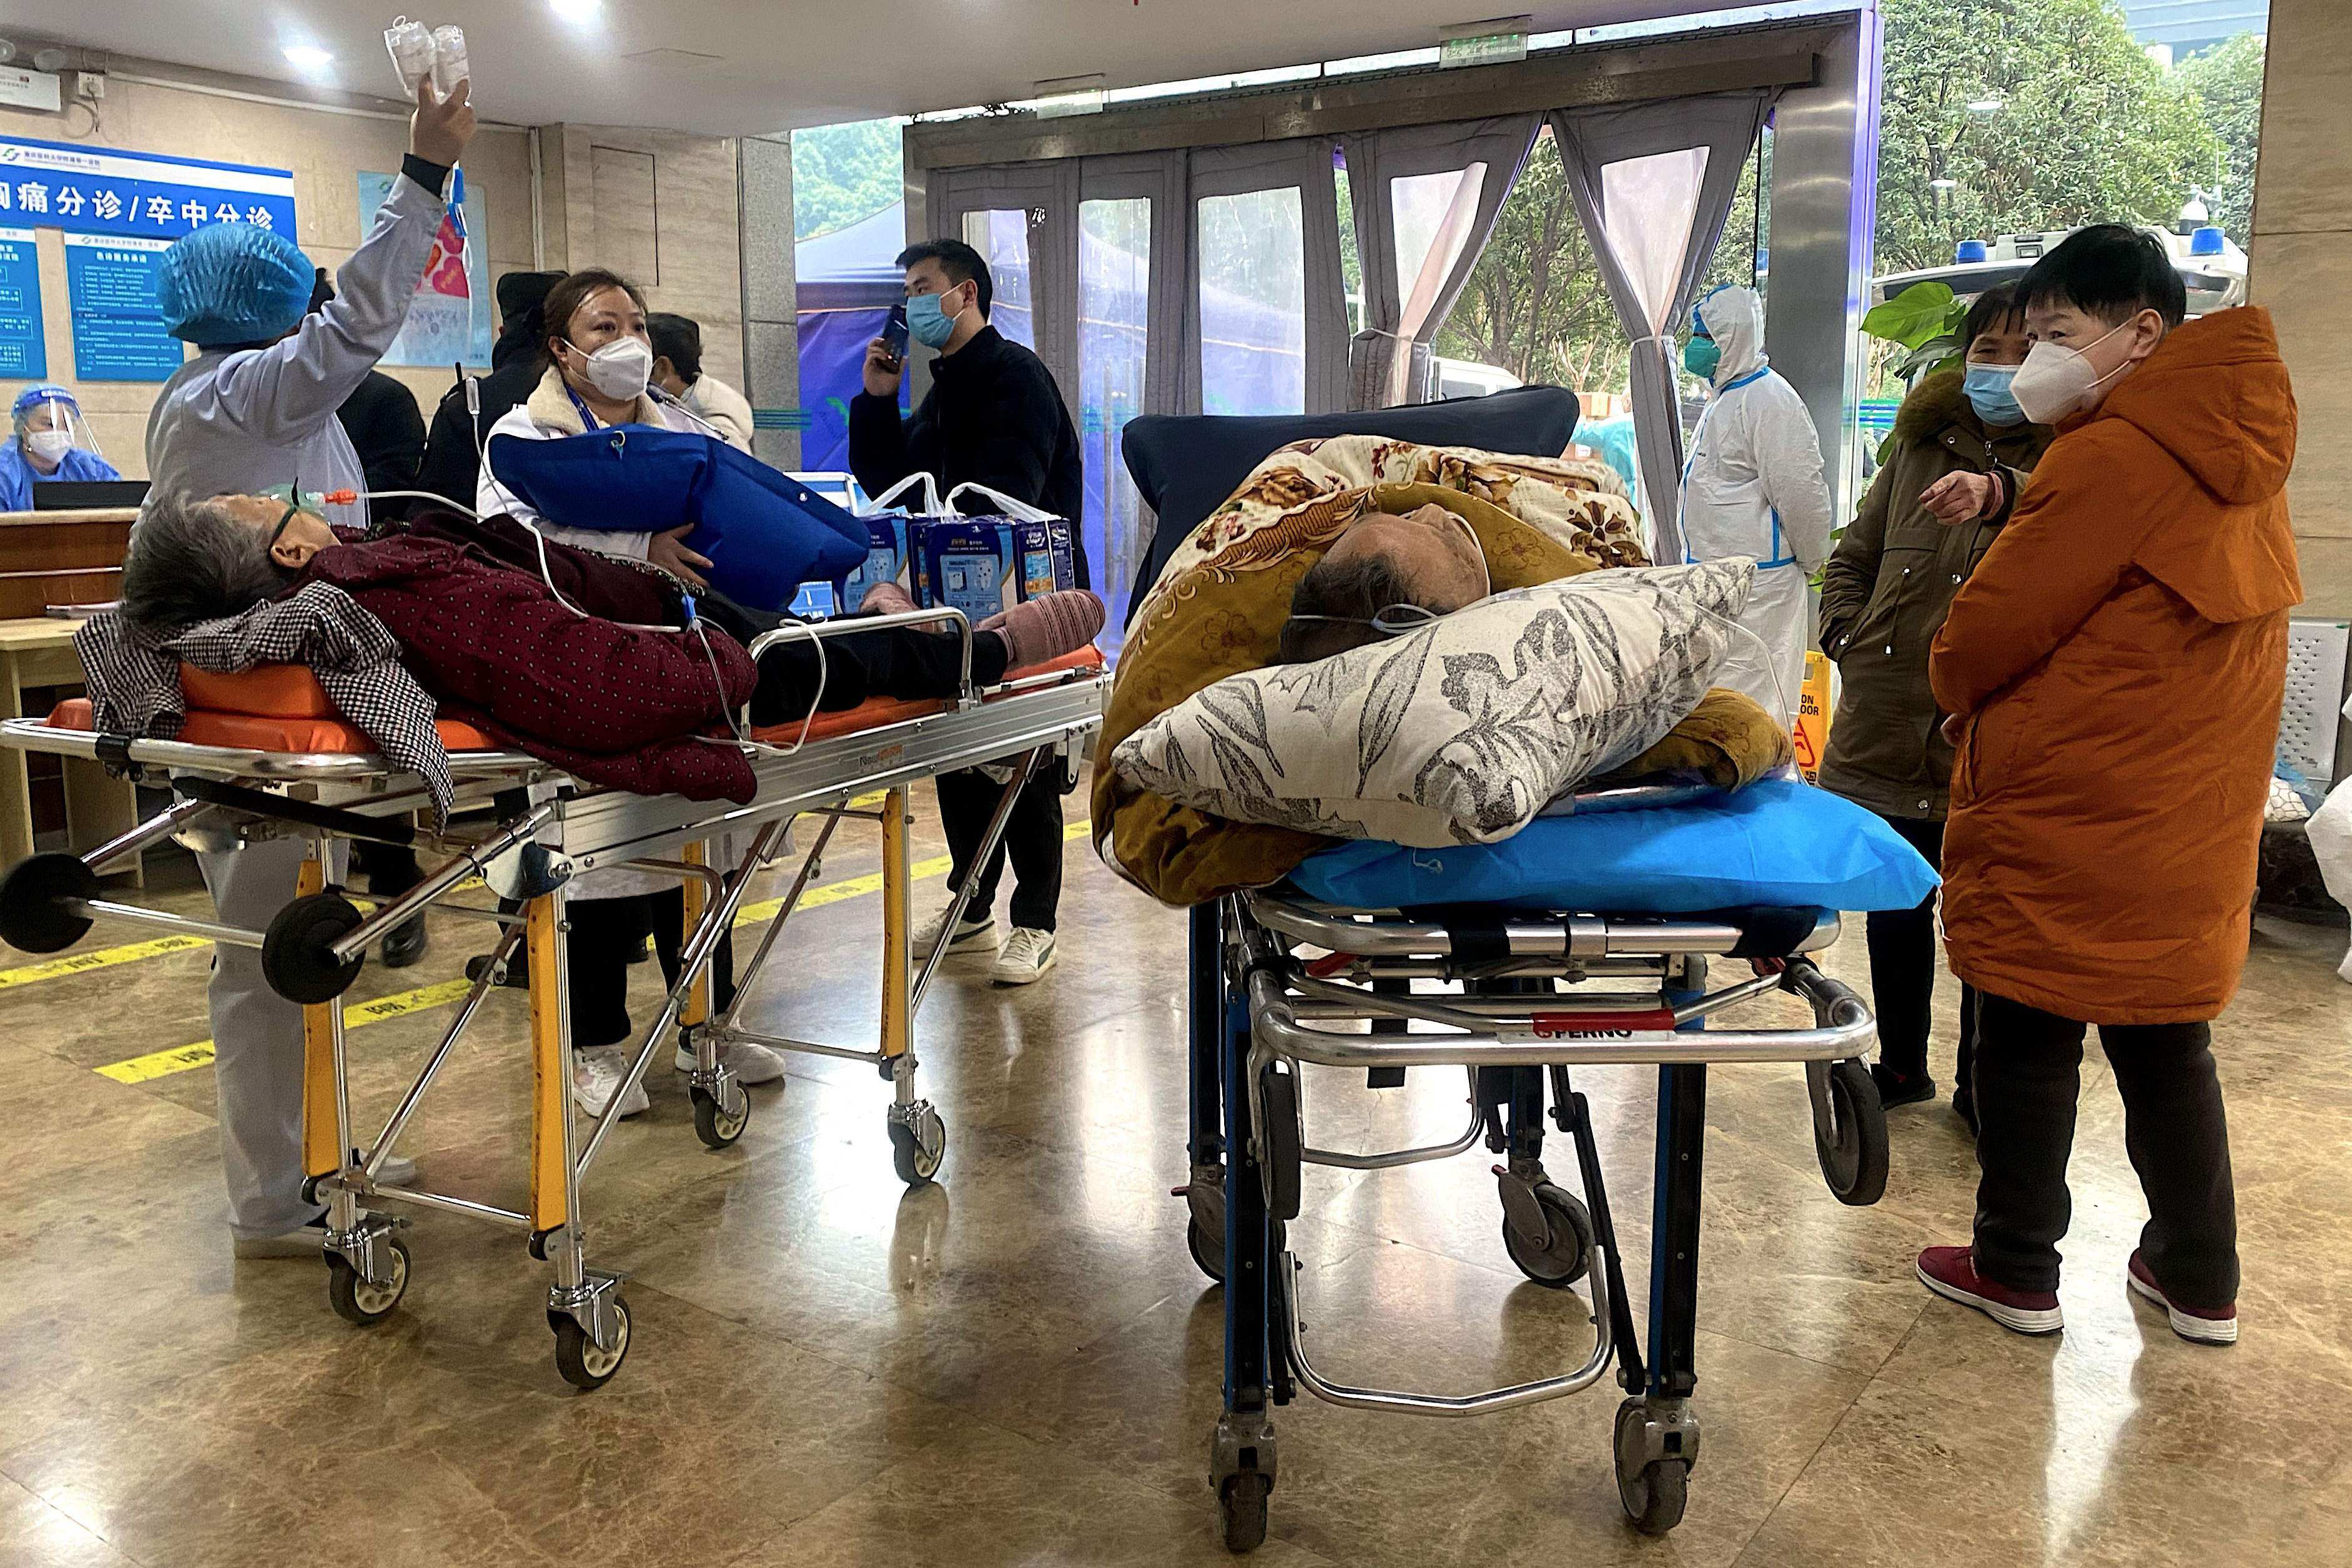 Covid-19 patients on stretchers in the emergency ward of a hospital in Chongqing, in China’s southwest, on Thursday. Photo: AFP